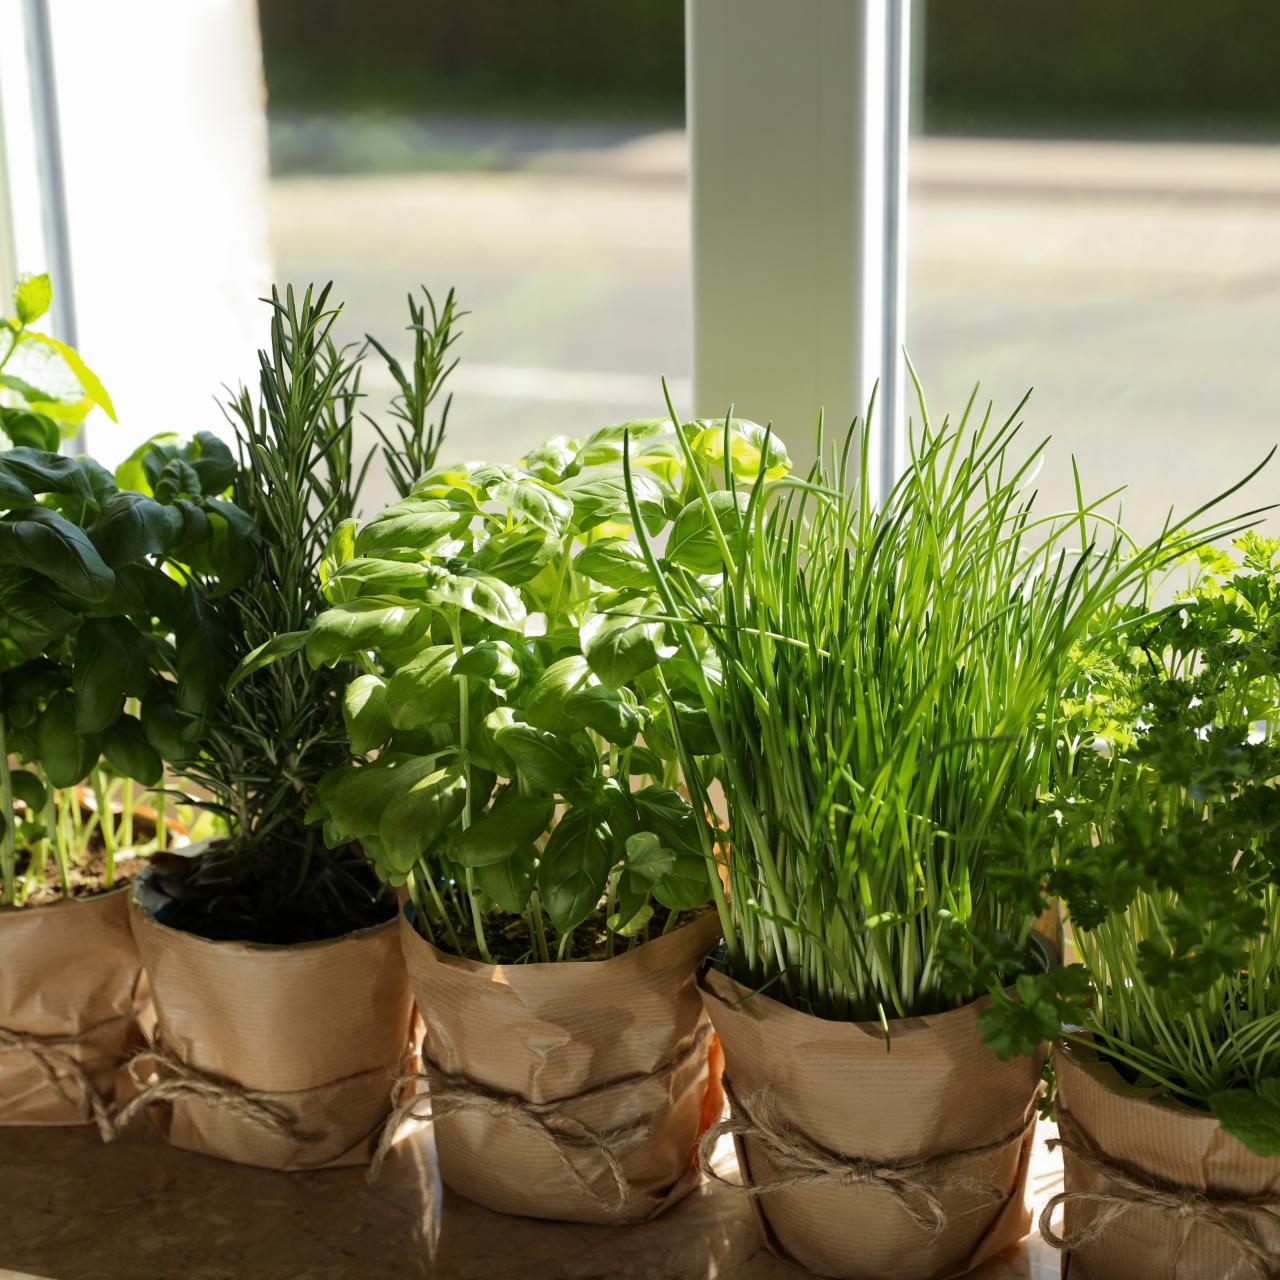 8 Things to Know About Growing Your Own Herbs